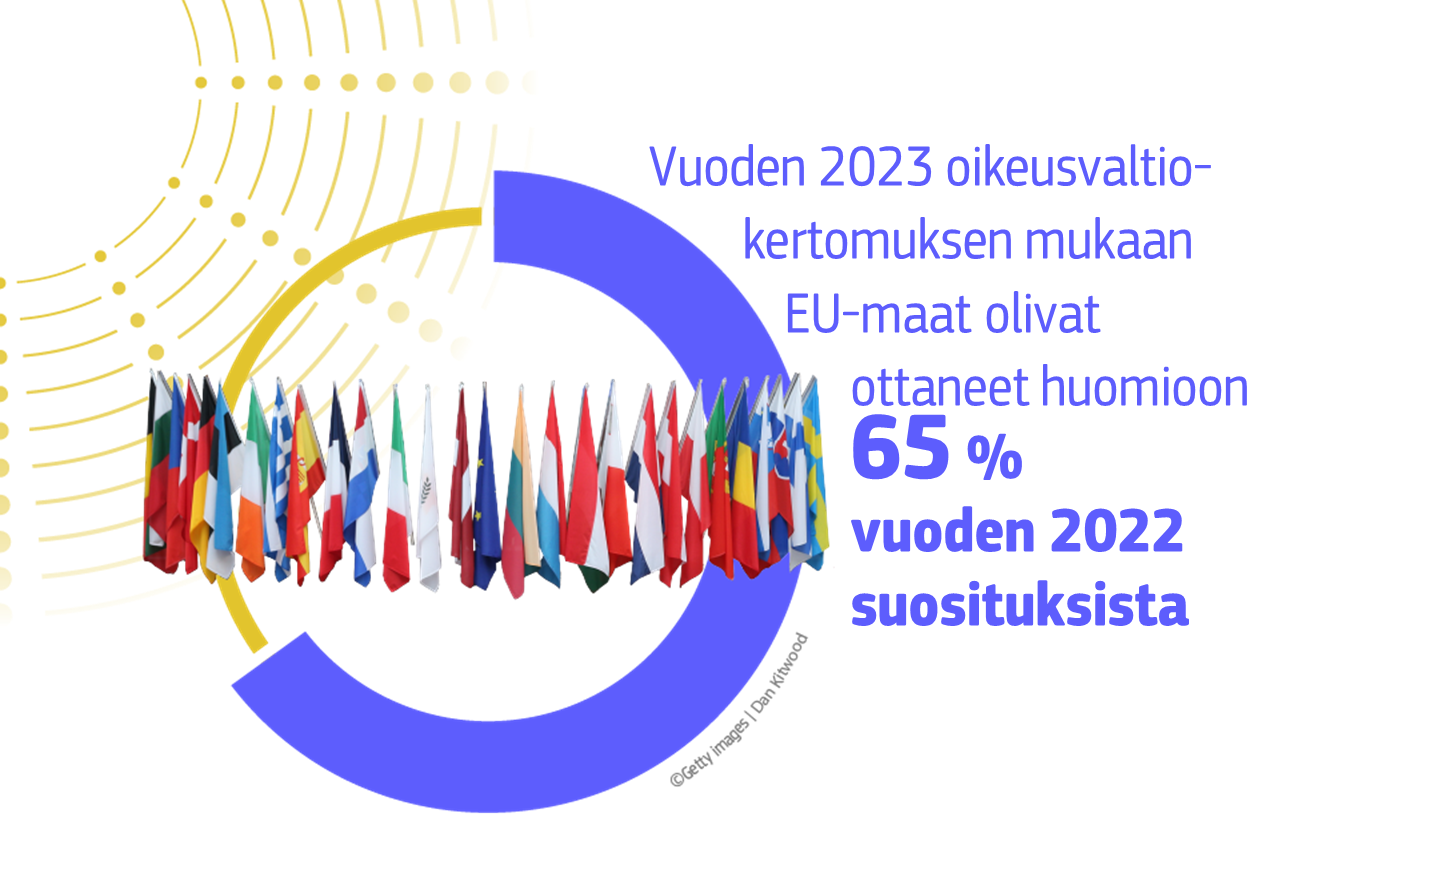 Infographic showing 65% of the 2022 recommendations were addressed by the Member States